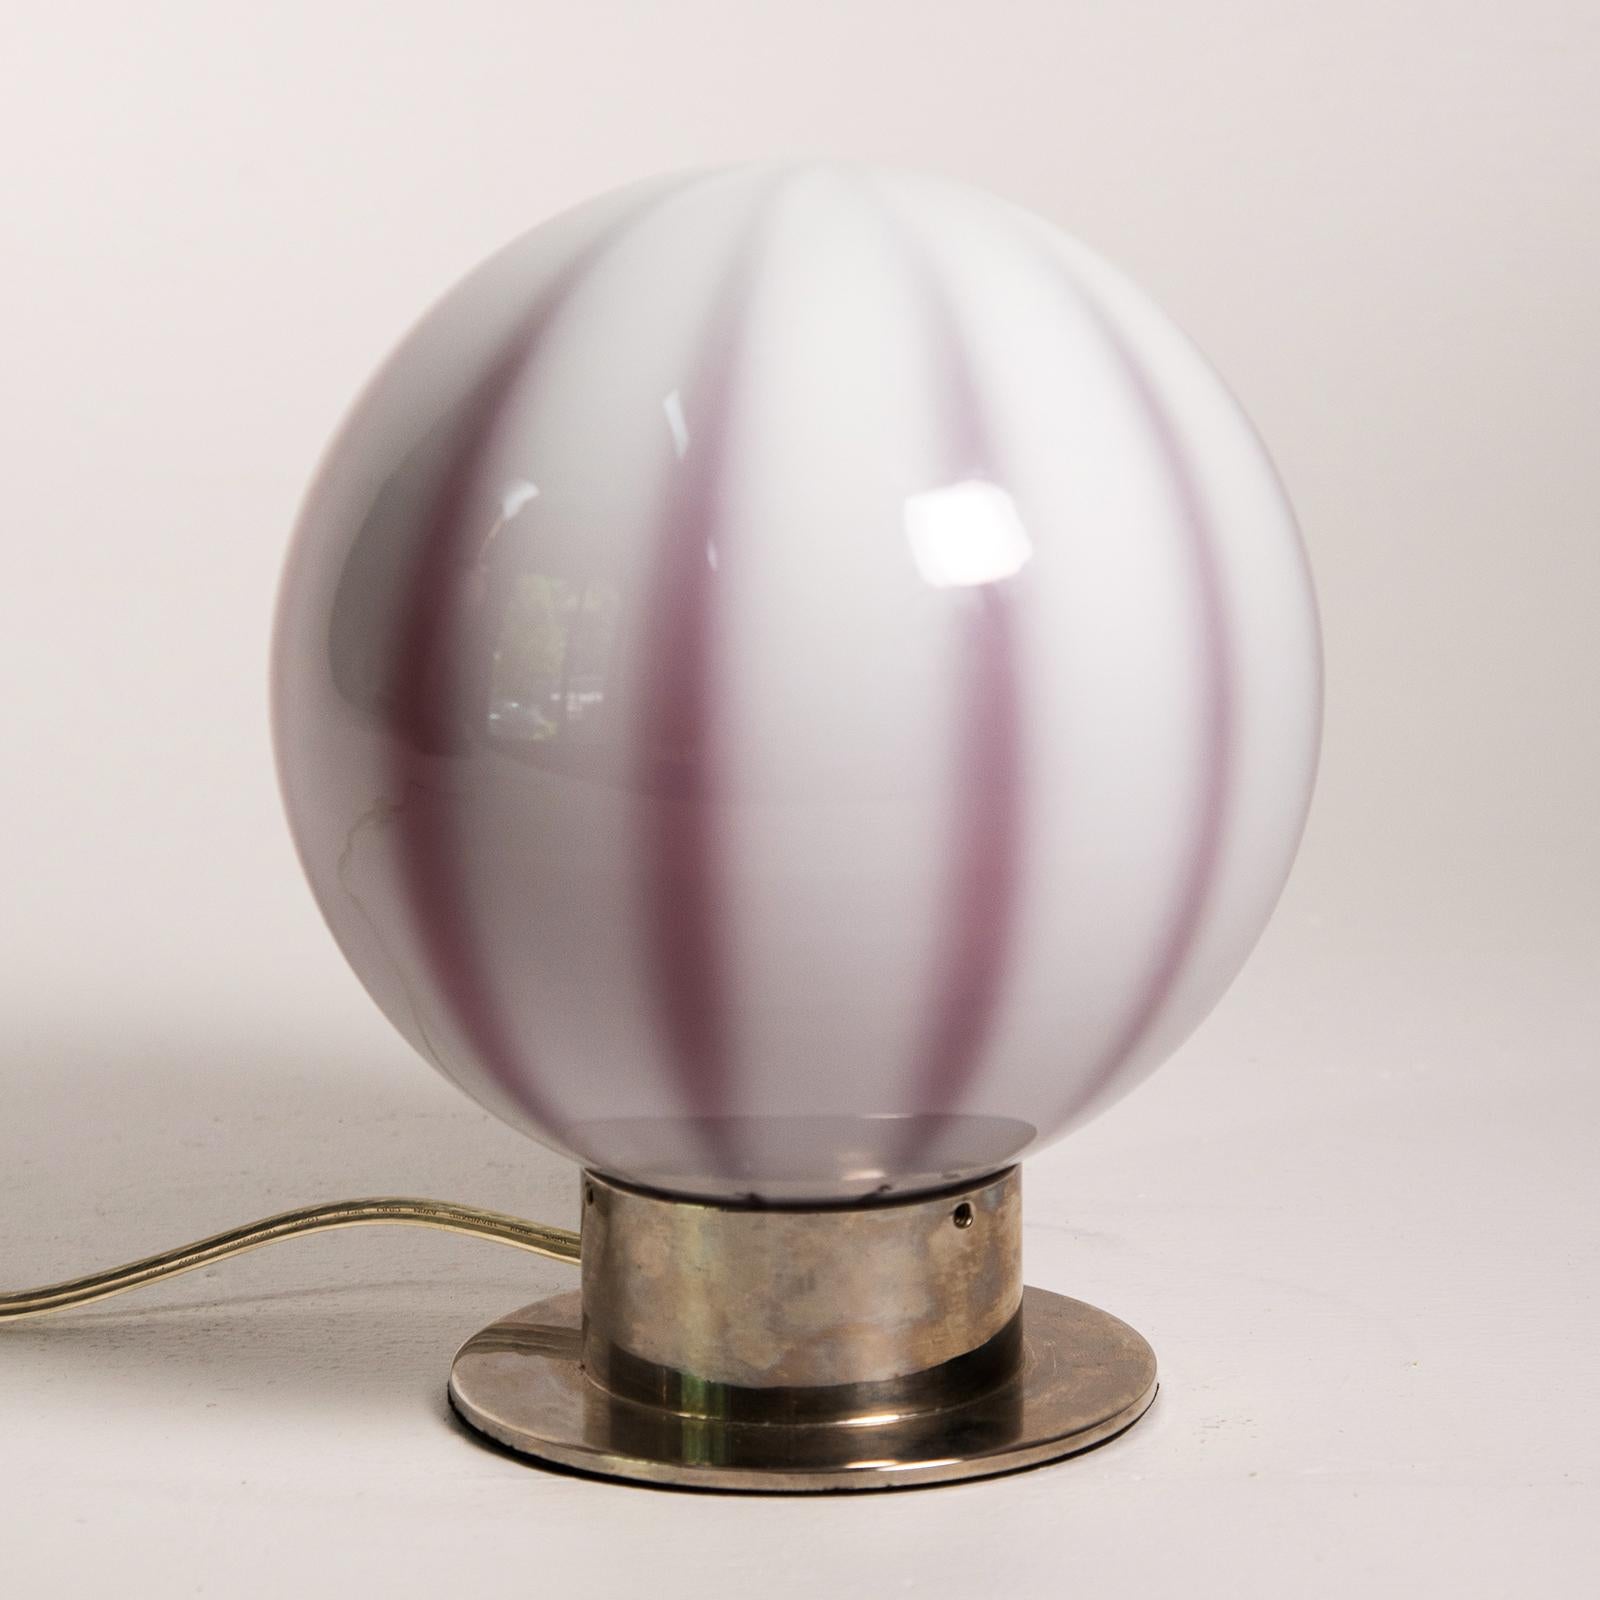 Murano glass globe shaped table lamp the cased glass shade with red/purple tones with white panels fitting into a silver plate base. When the lamp is off, it is more purple, when on shines red. Made in Italy by Global Views.